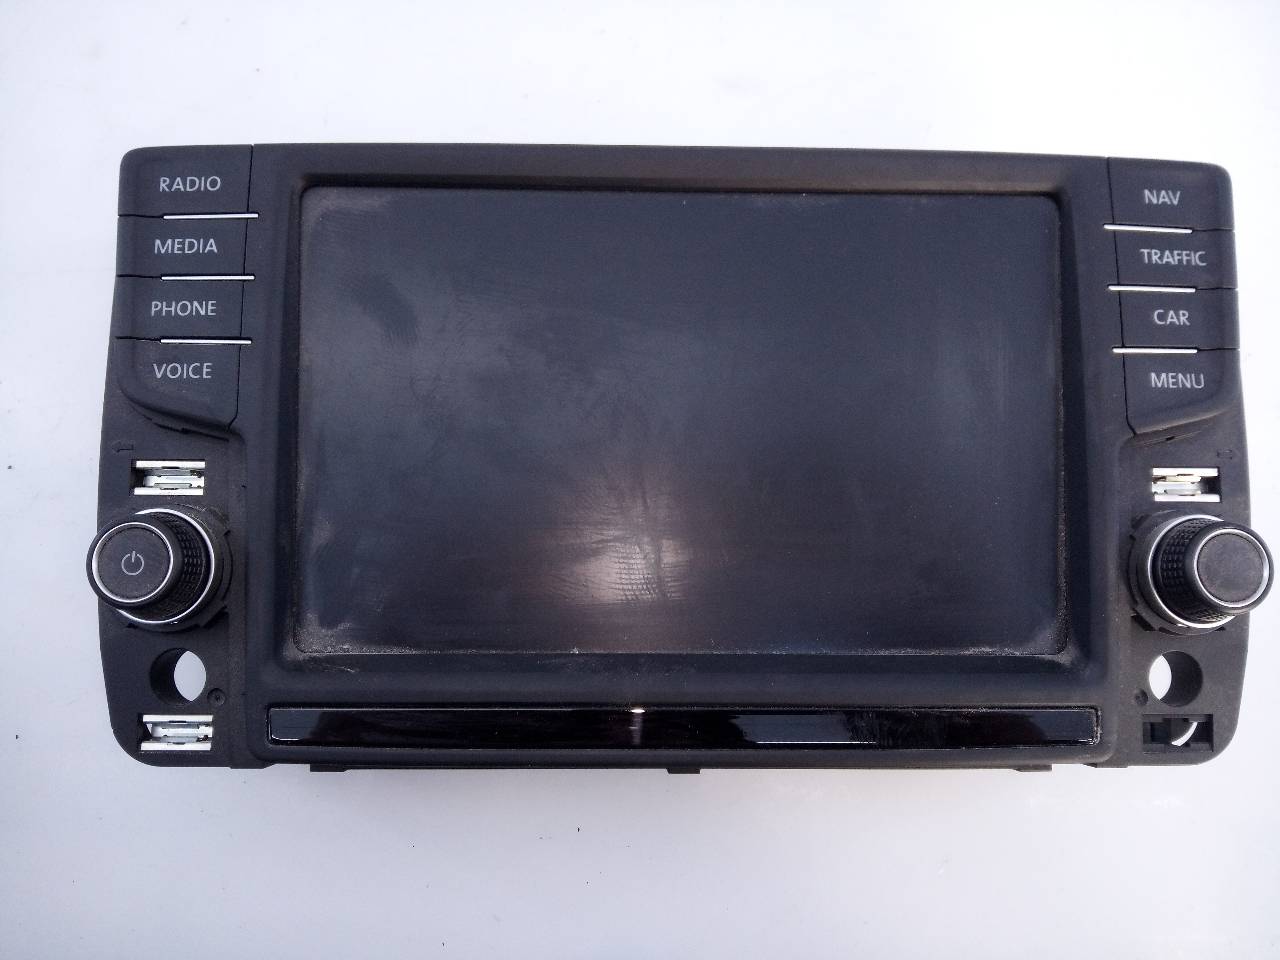 VOLKSWAGEN Tiguan 1 generation (2007-2017) Music Player With GPS 5G0919606, 3Q0035846A, E2-A1-33-3 21793564